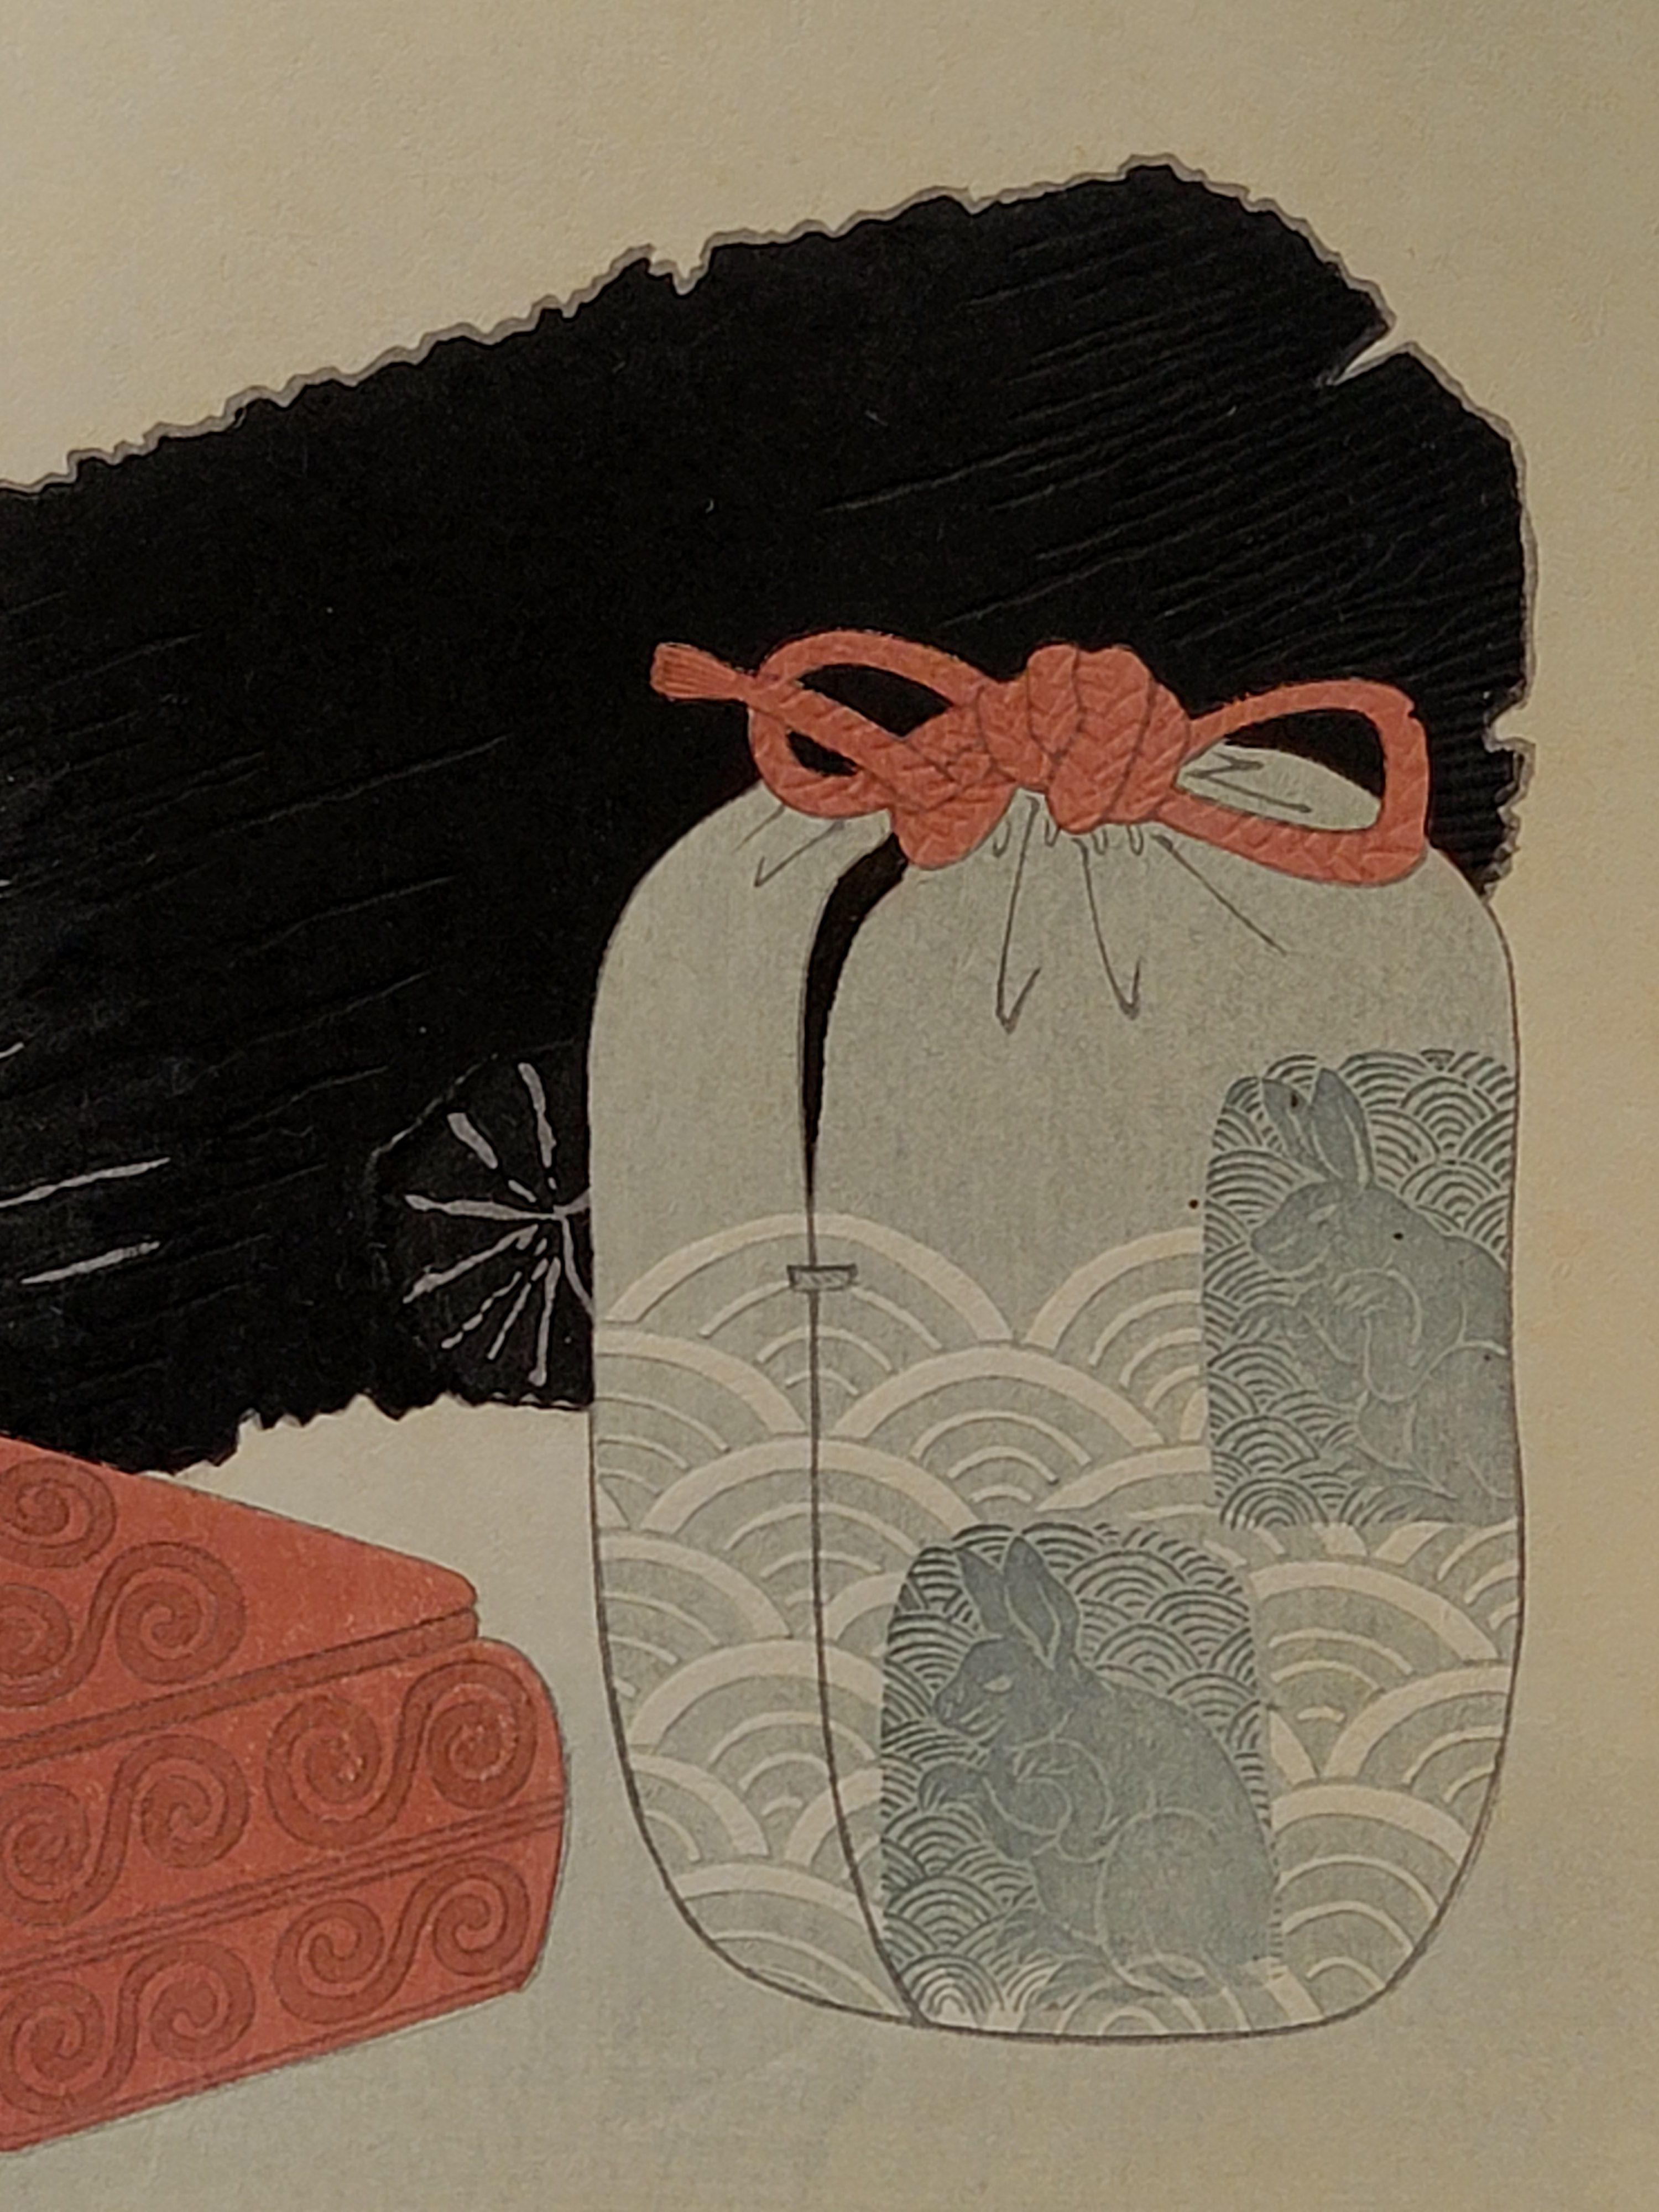 Original Japanese Woodblock print by Totoya Hokkei ????(1780-1850)

About the artist

Totoya Hokkei (?? ??, 1780–1850) was a Japanese artist best known for his prints in the ukiyo-e style. Hokkei was one of Hokusai's first and best-known